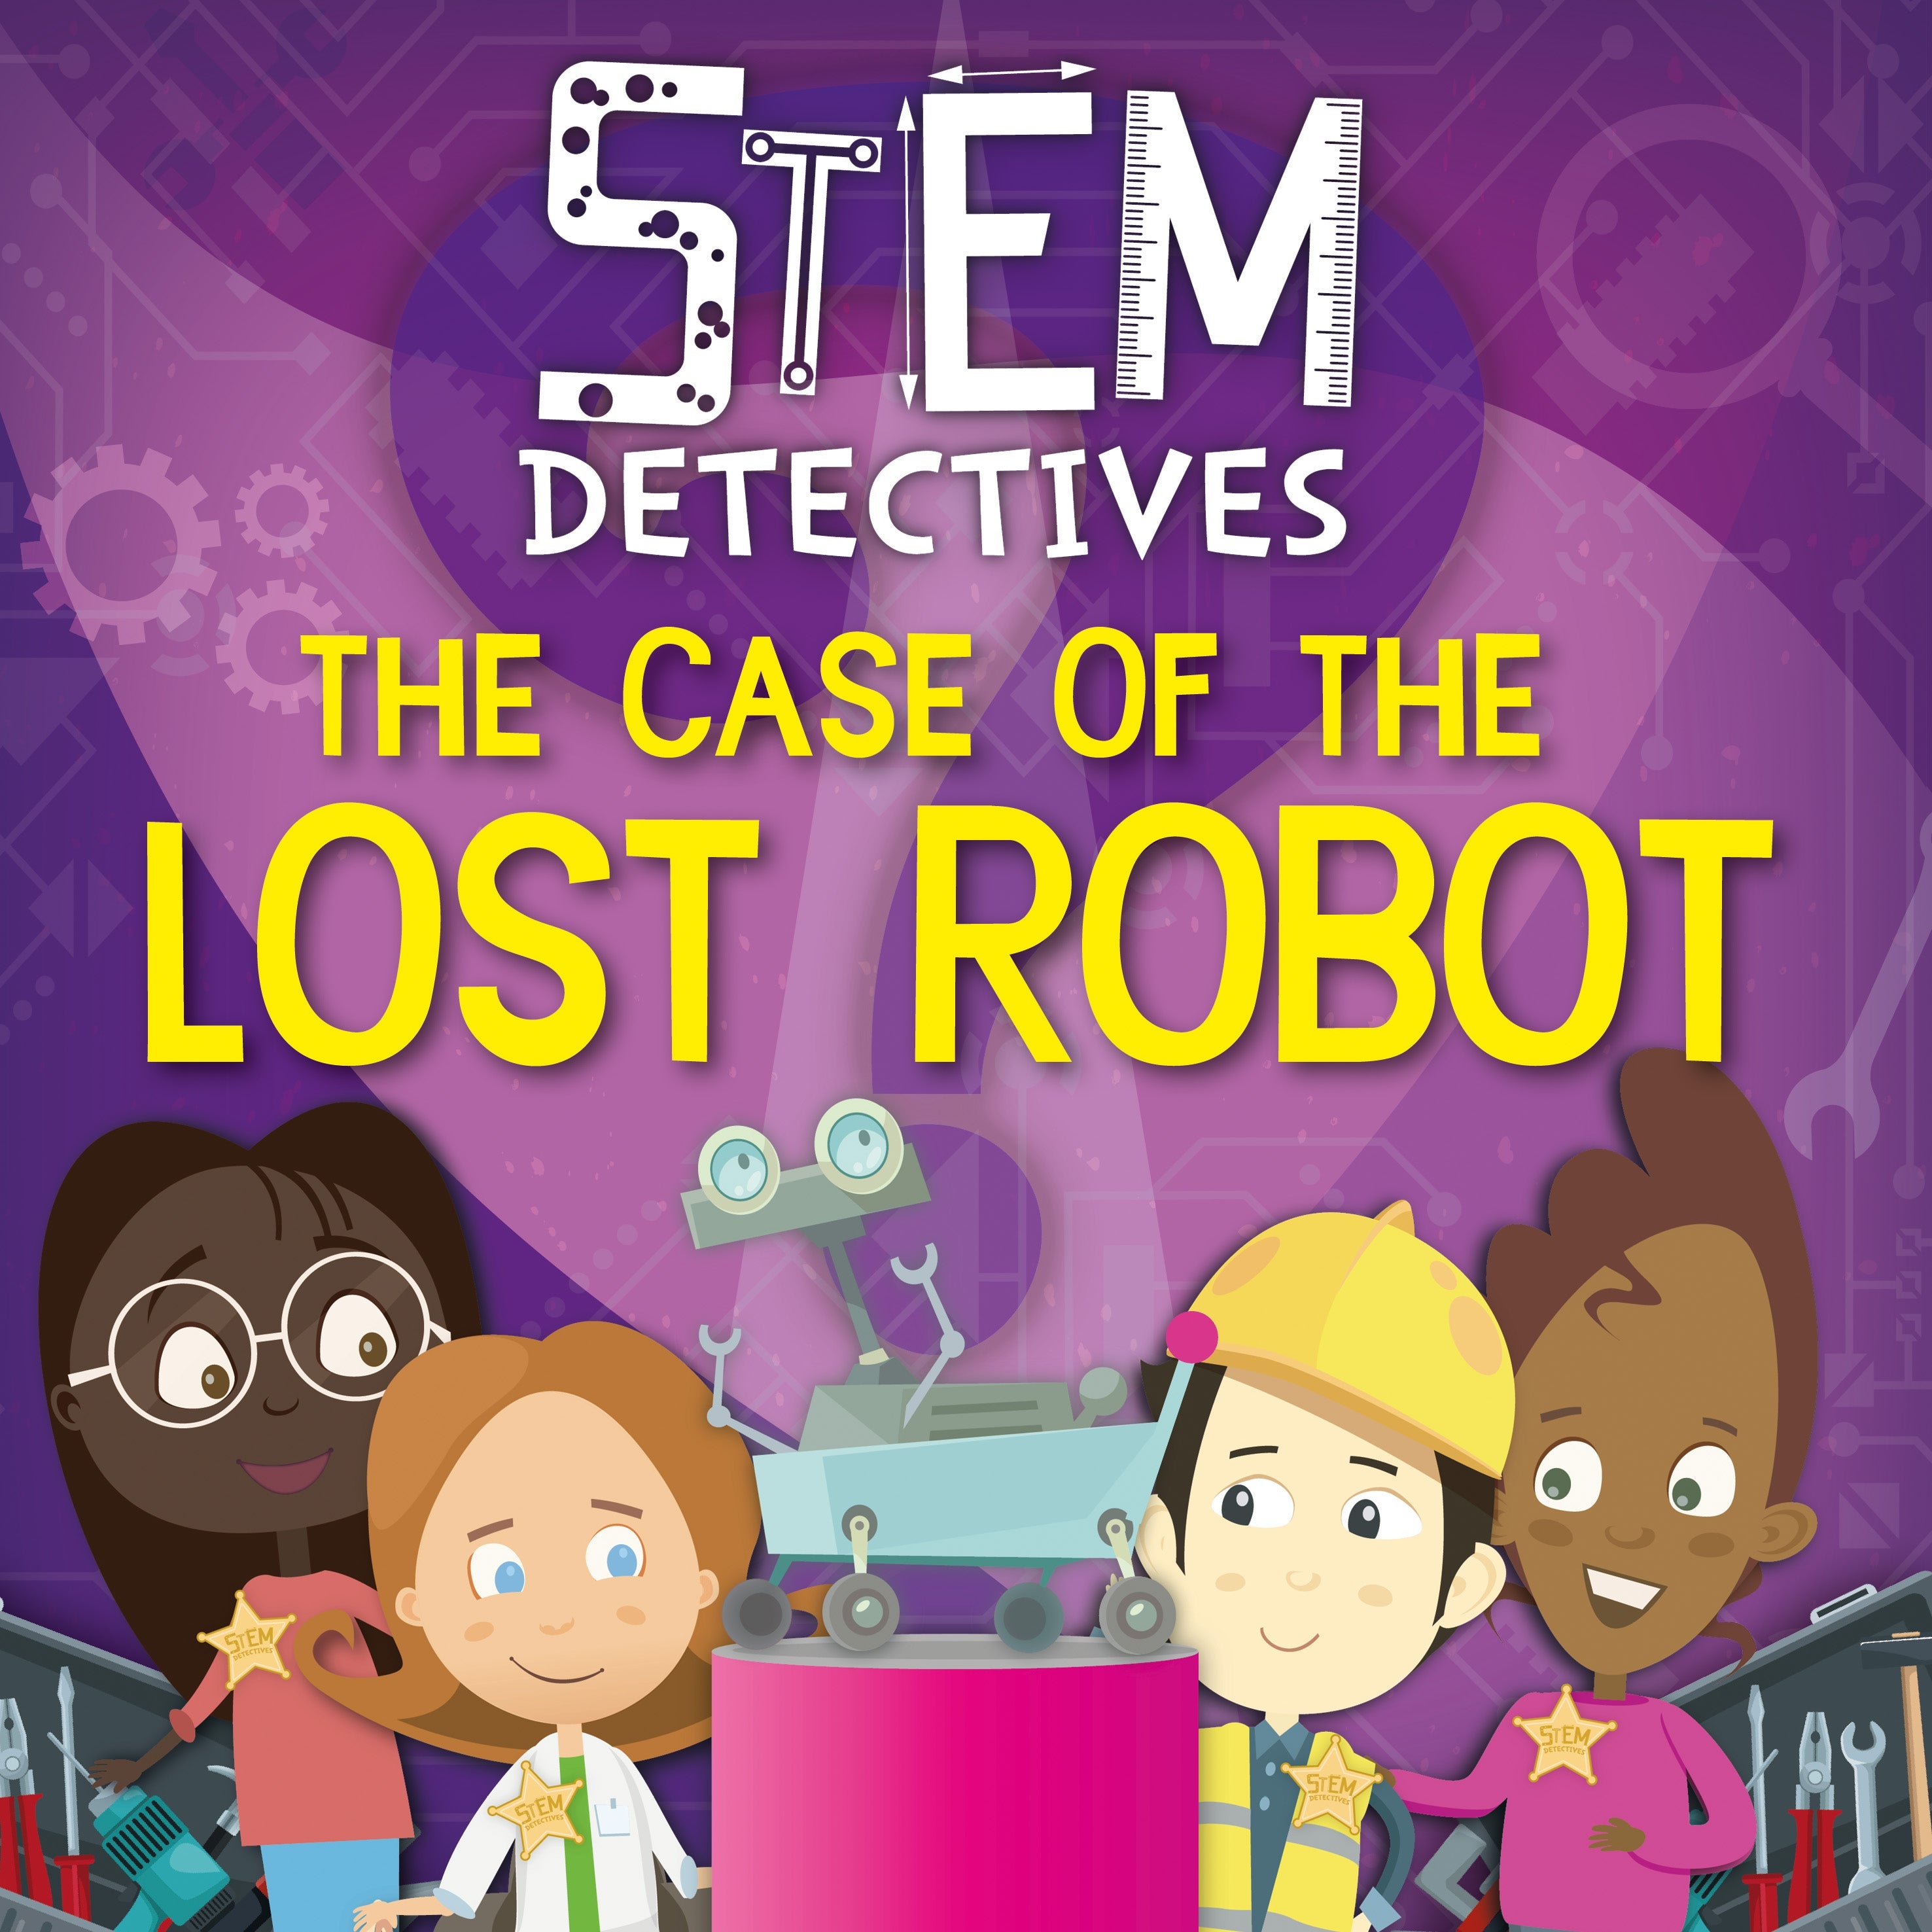 STEM Detectives: The Case of the Lost Robot e-Book